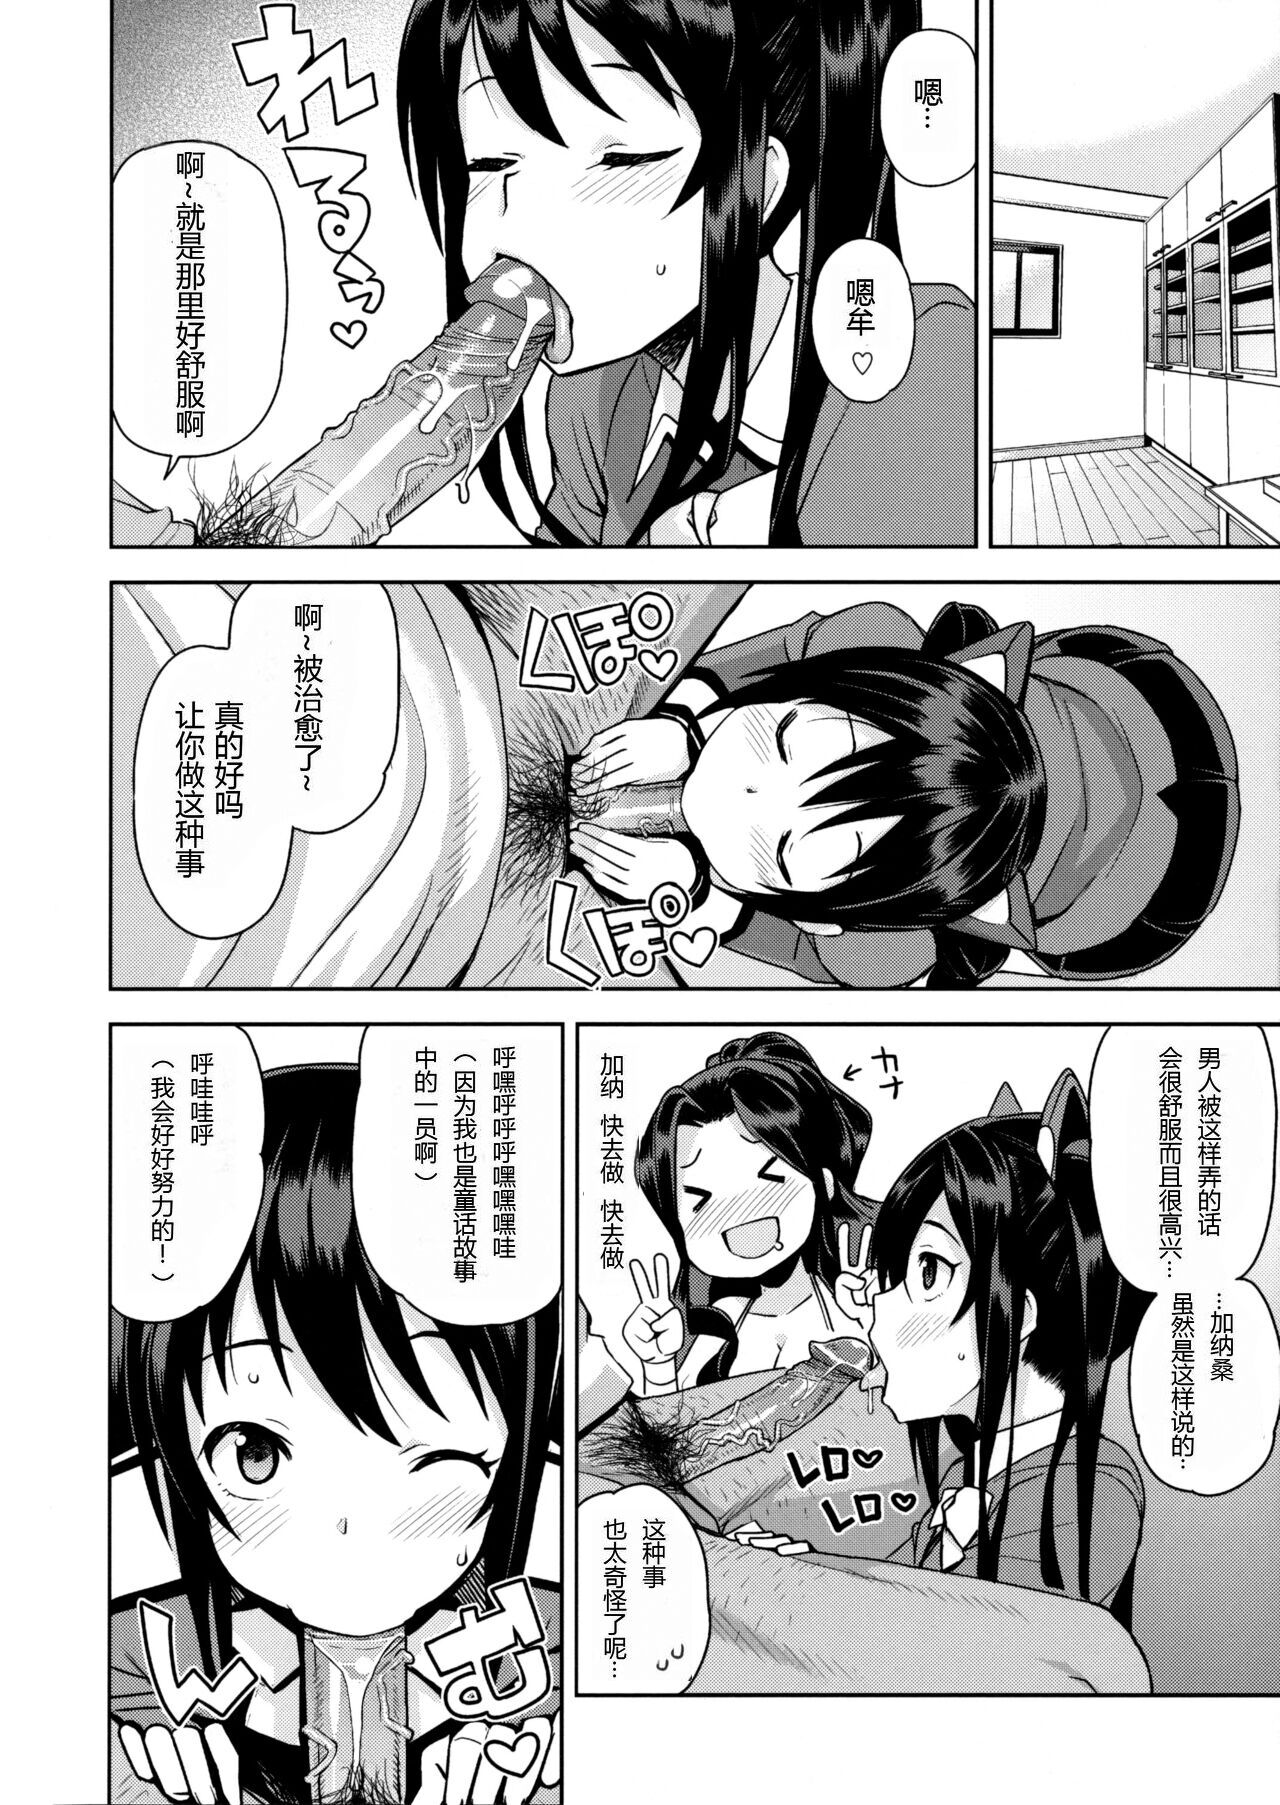 (COMIC1☆10) [Funi Funi Lab (Tamagoro)] Witch Bitch Collection Vol.2 (Fairy Tail)[Chinese] [Decensored] (COMIC1☆10) [フニフニラボ (たまごろー)] Witch Bitch Collection Vol.2 (フェアリーテイル)[中国翻訳] [無修正]